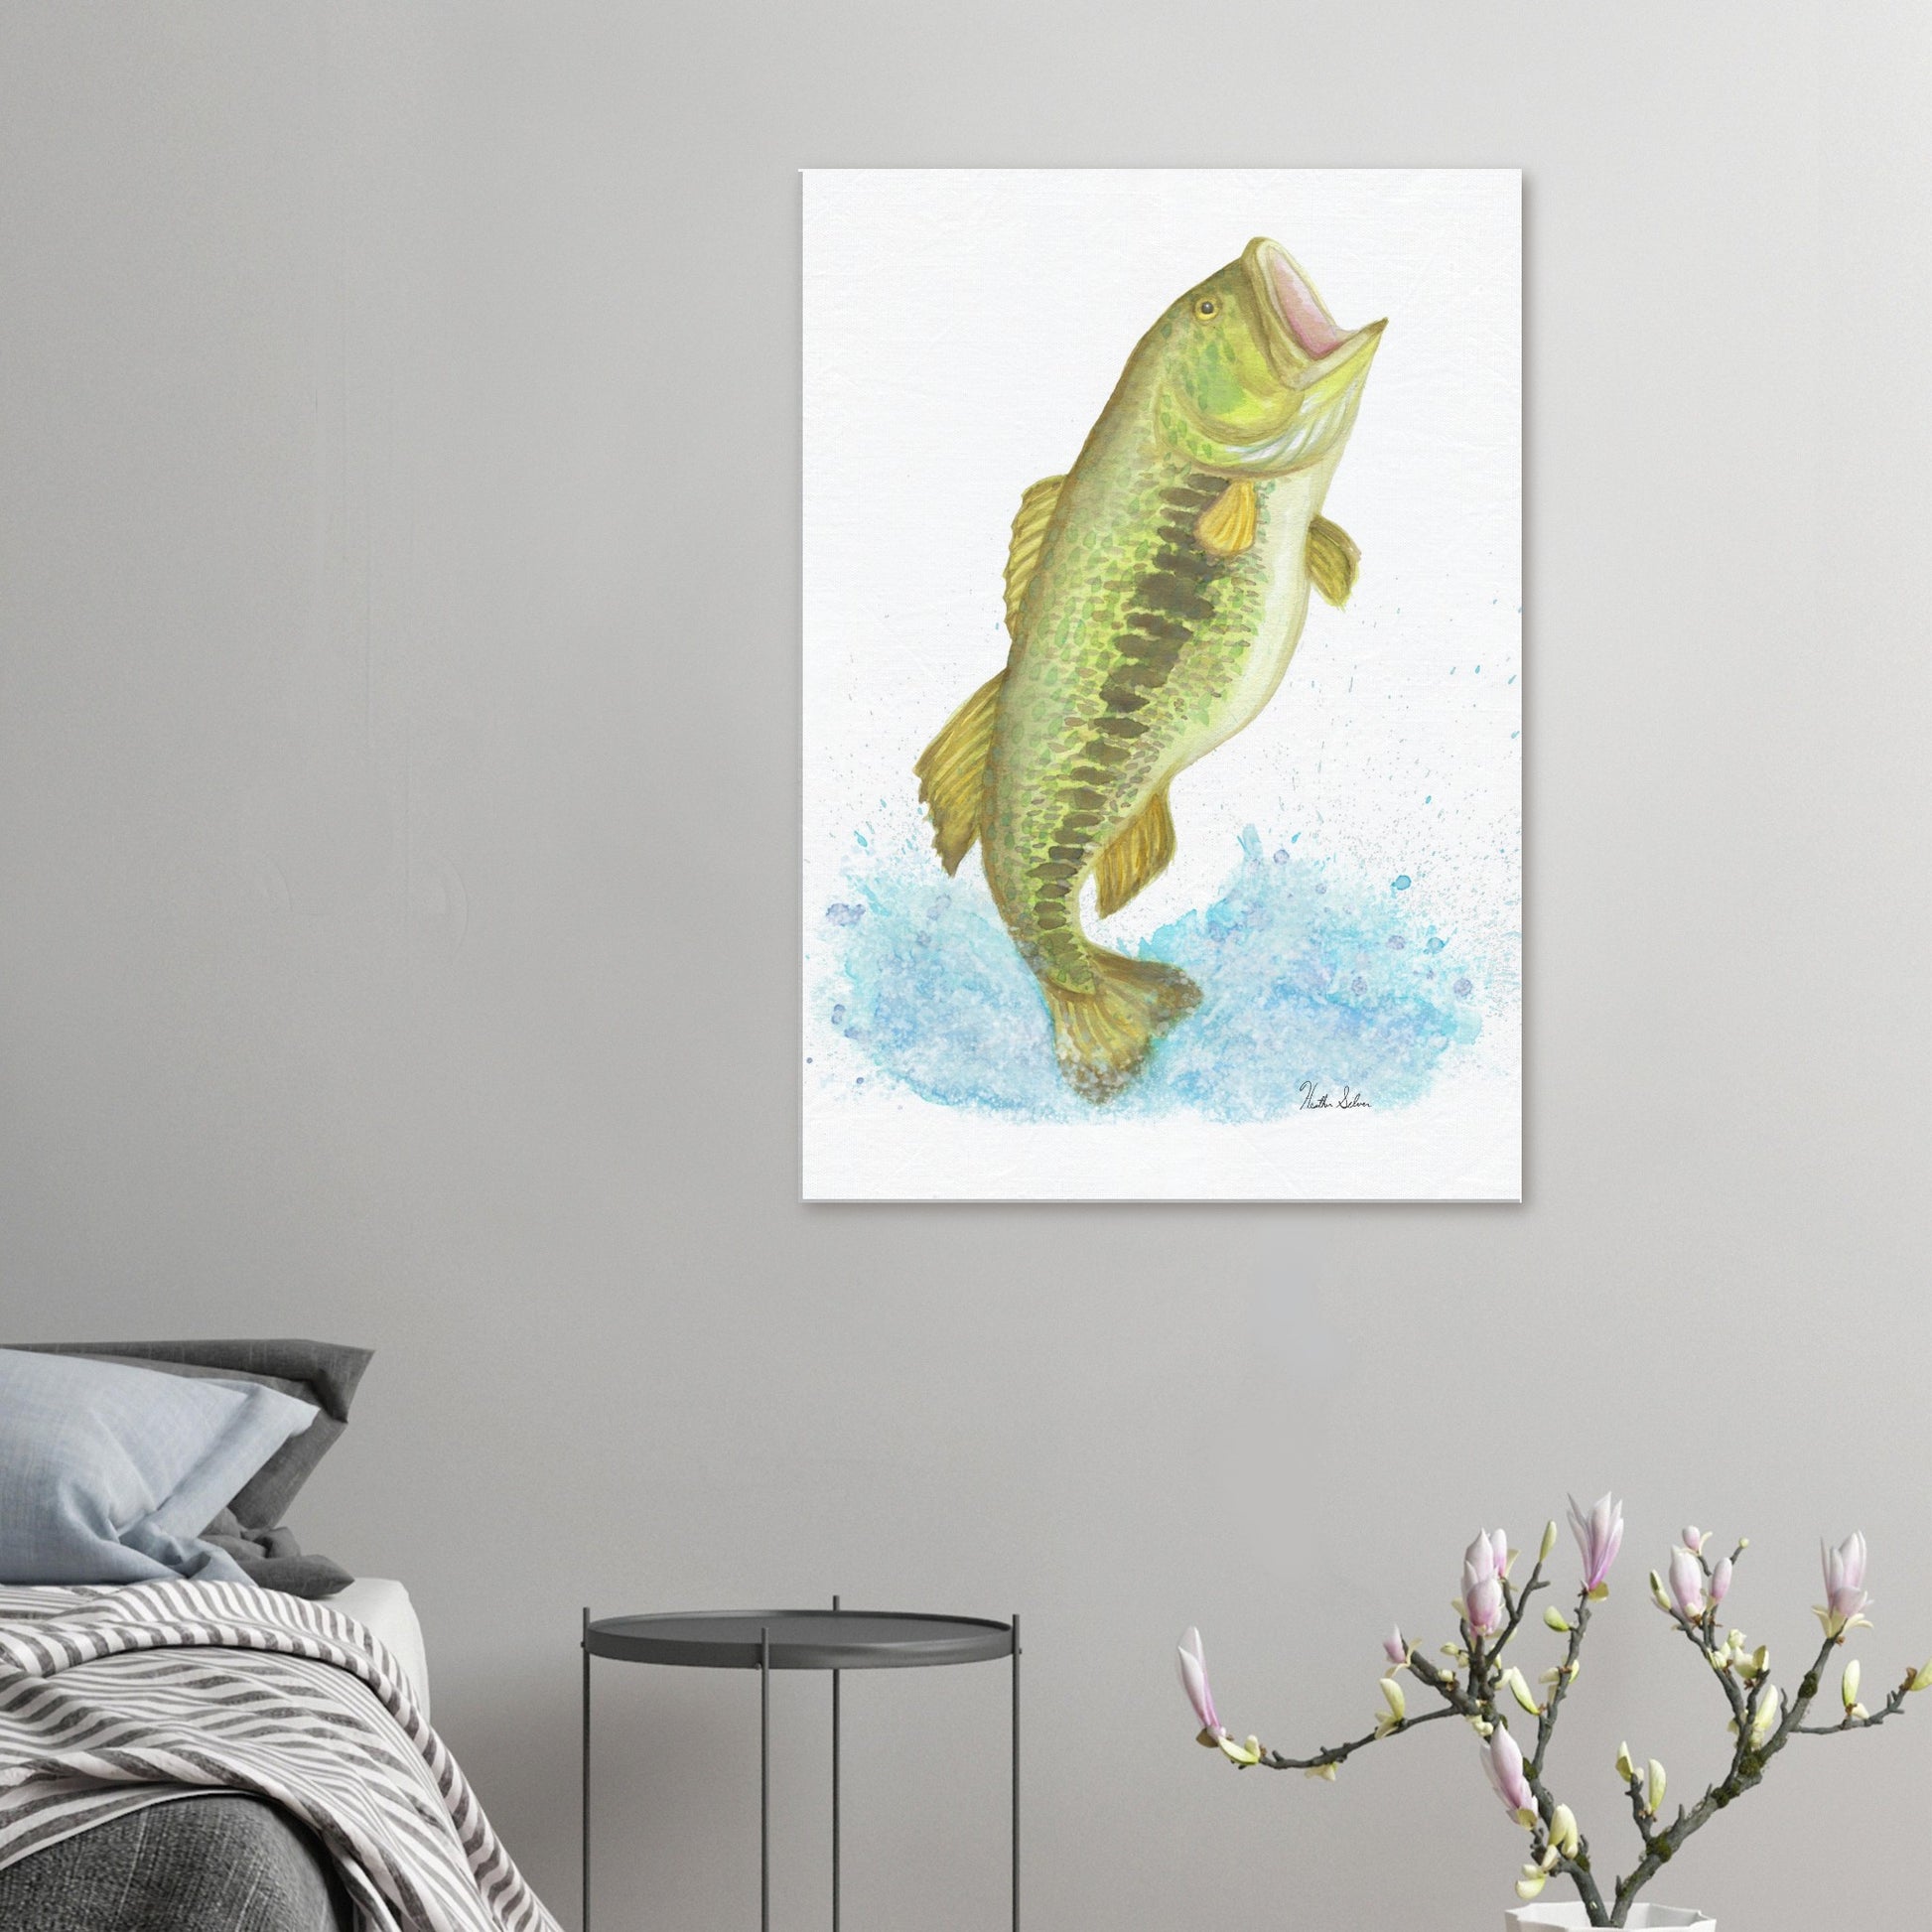 28 by 40 inch slim canvas wall art print featuring a watercolor painting of a largemouth bass leaping from the water. Shown above grey bed, grey nightstand, and flowering branch decor.